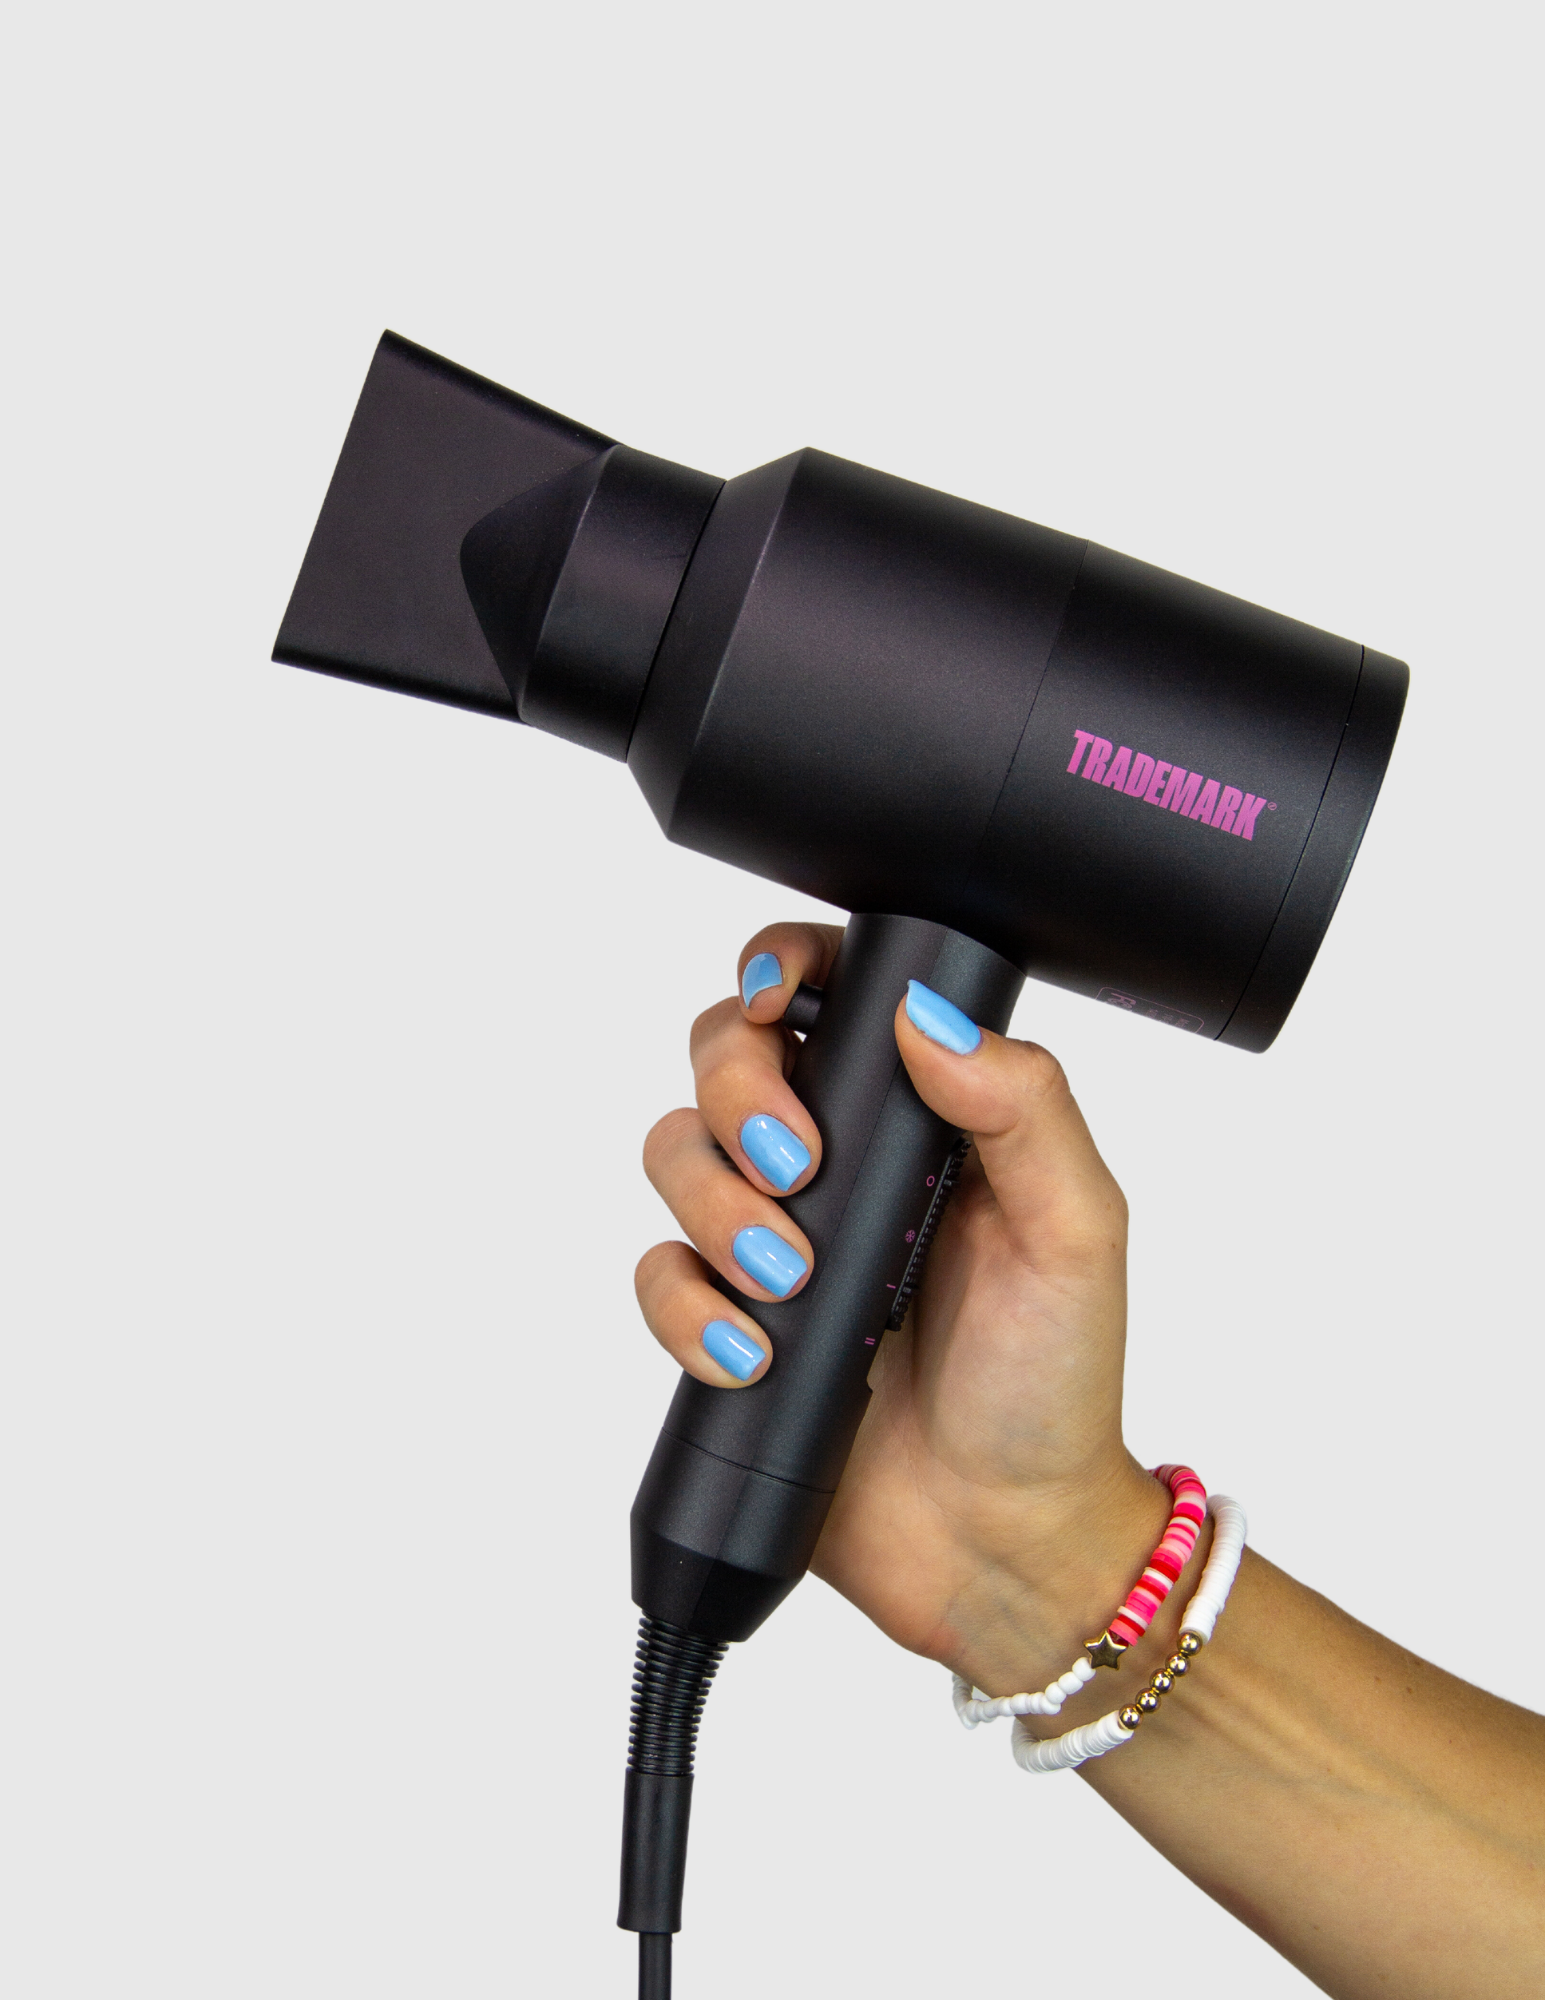 The Blow Dryer